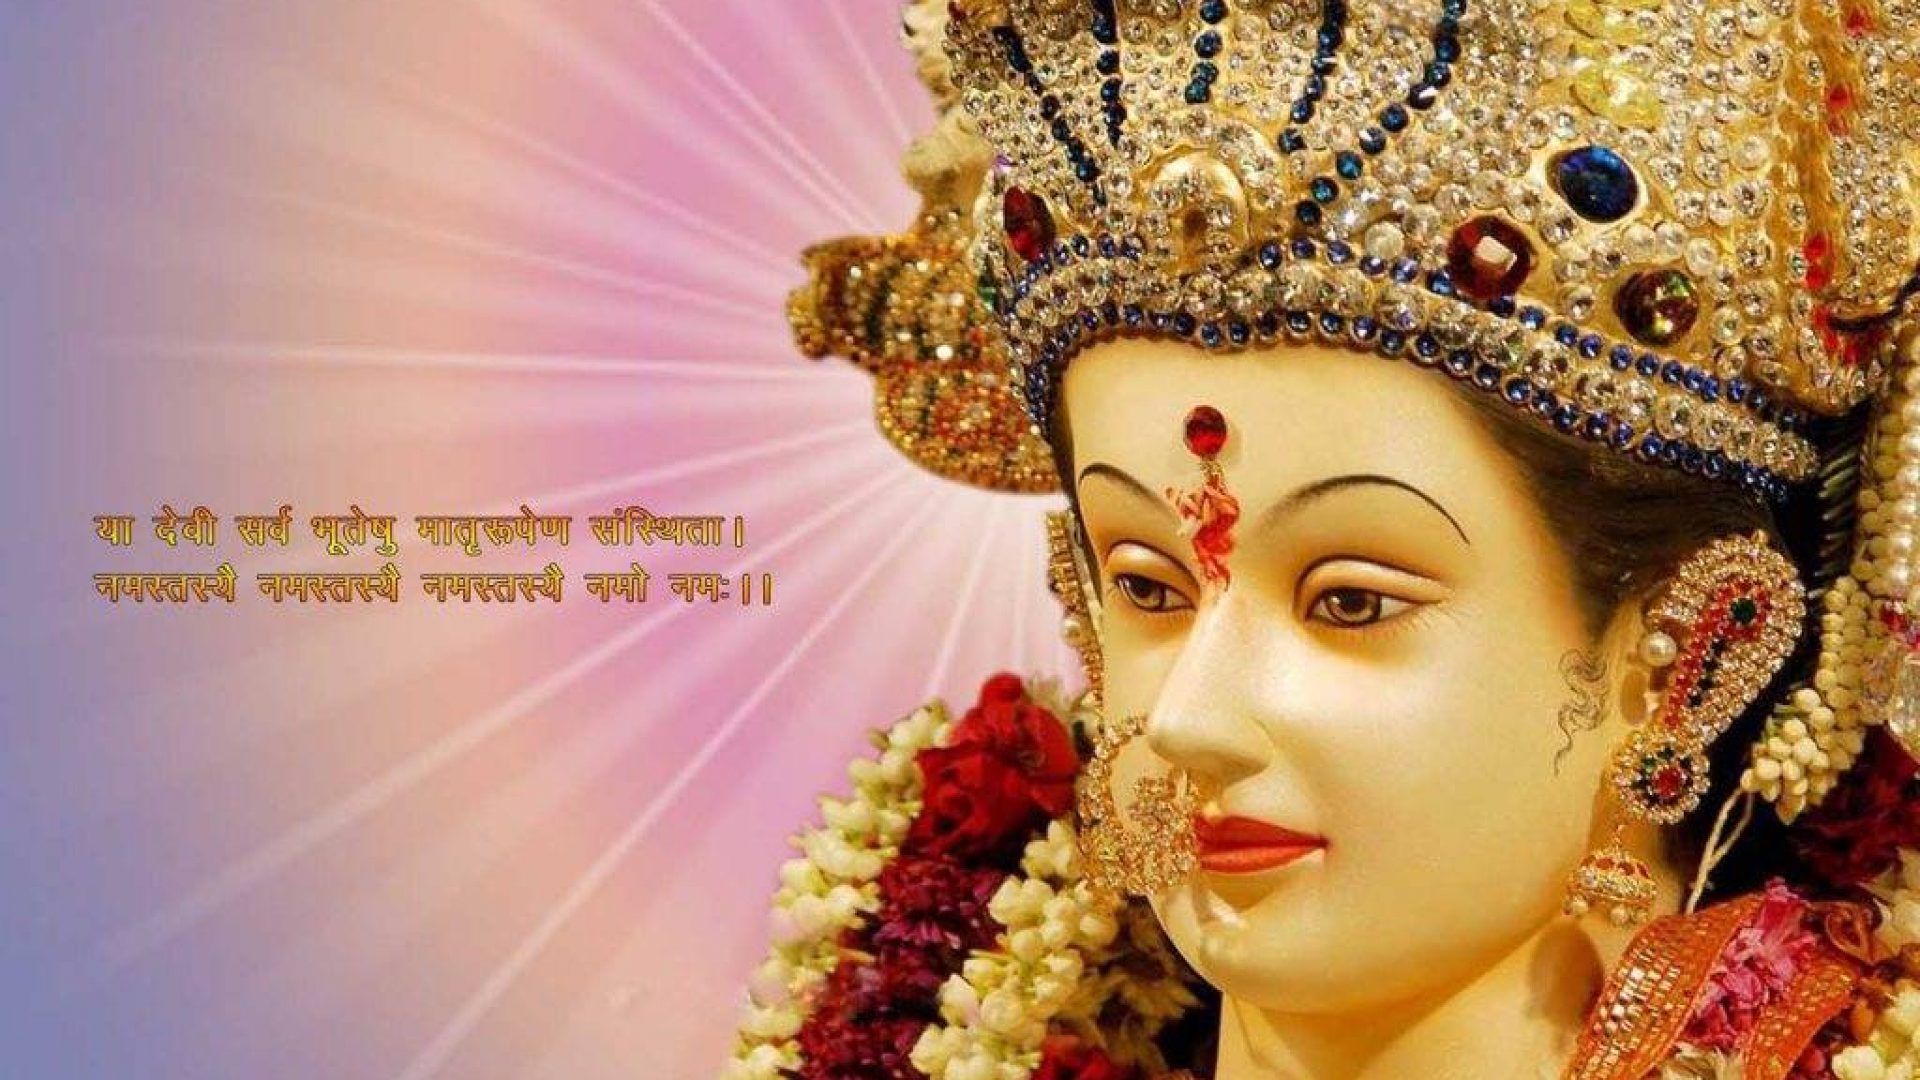 Maa Durga Full Hd Wallpaper With Quotes For Wishing Happy Navratri - God HD  Wallpapers